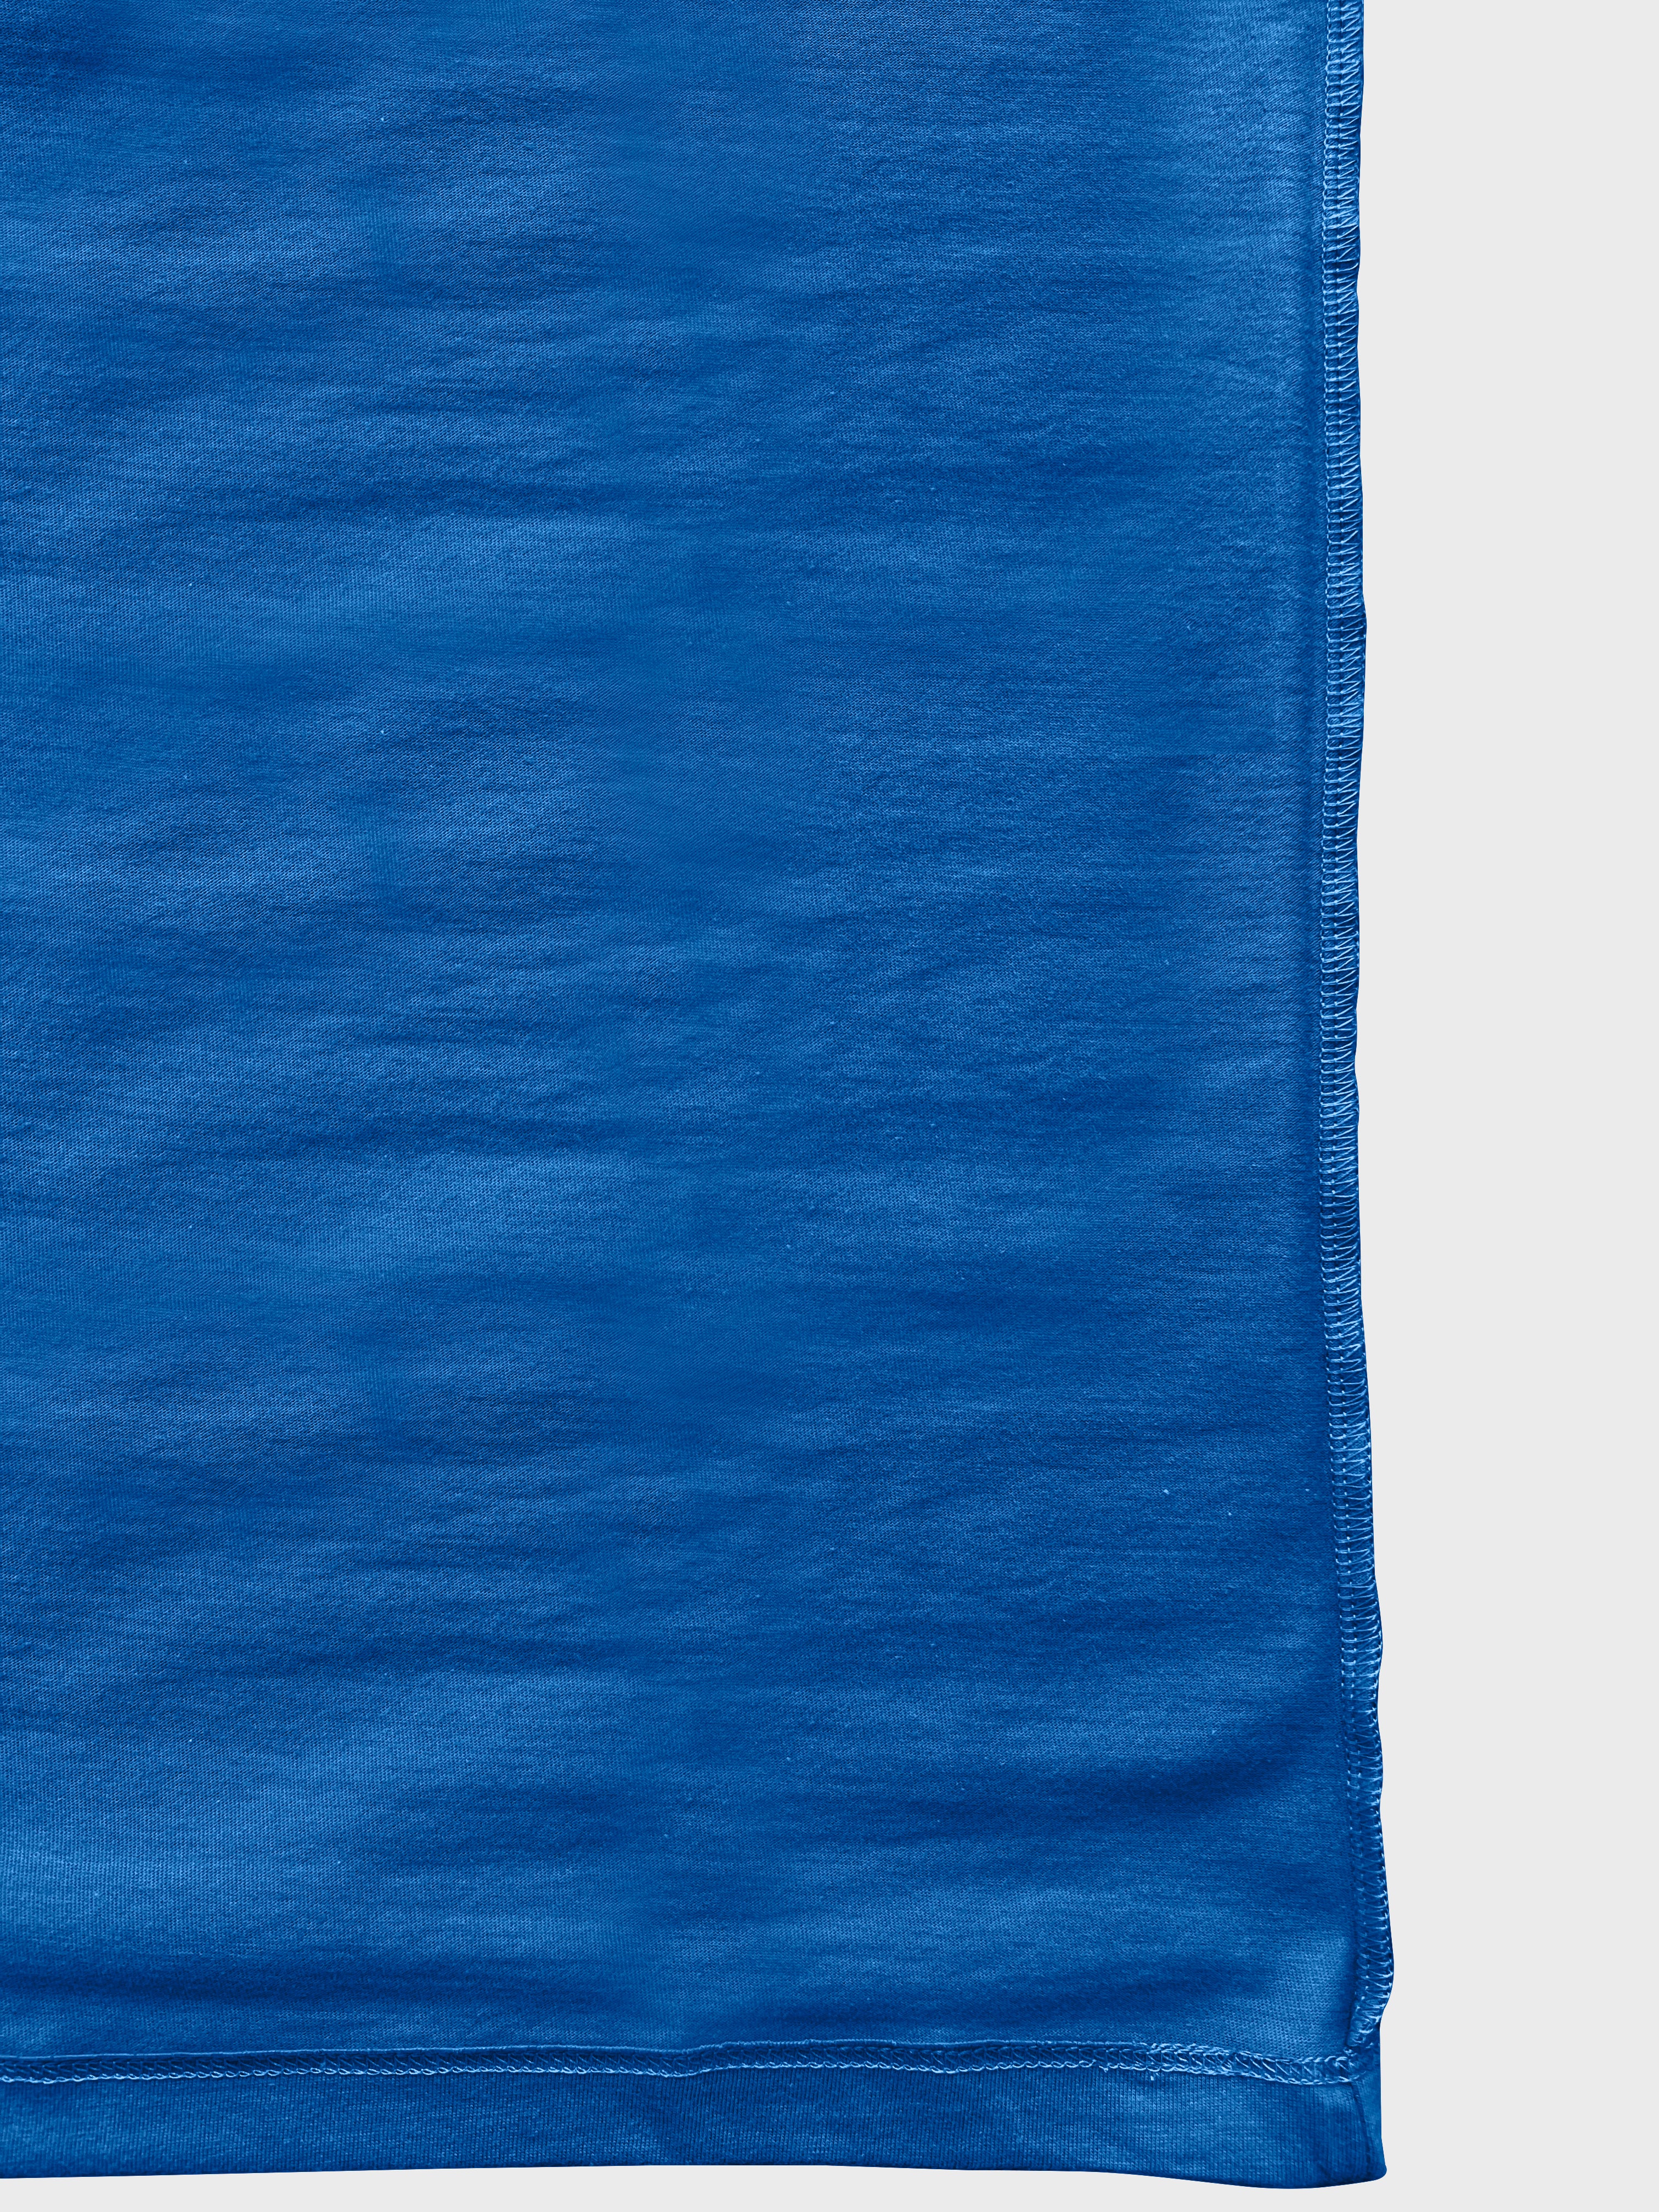 Royalblue RoundNeck Mens Tshirts in  Side view